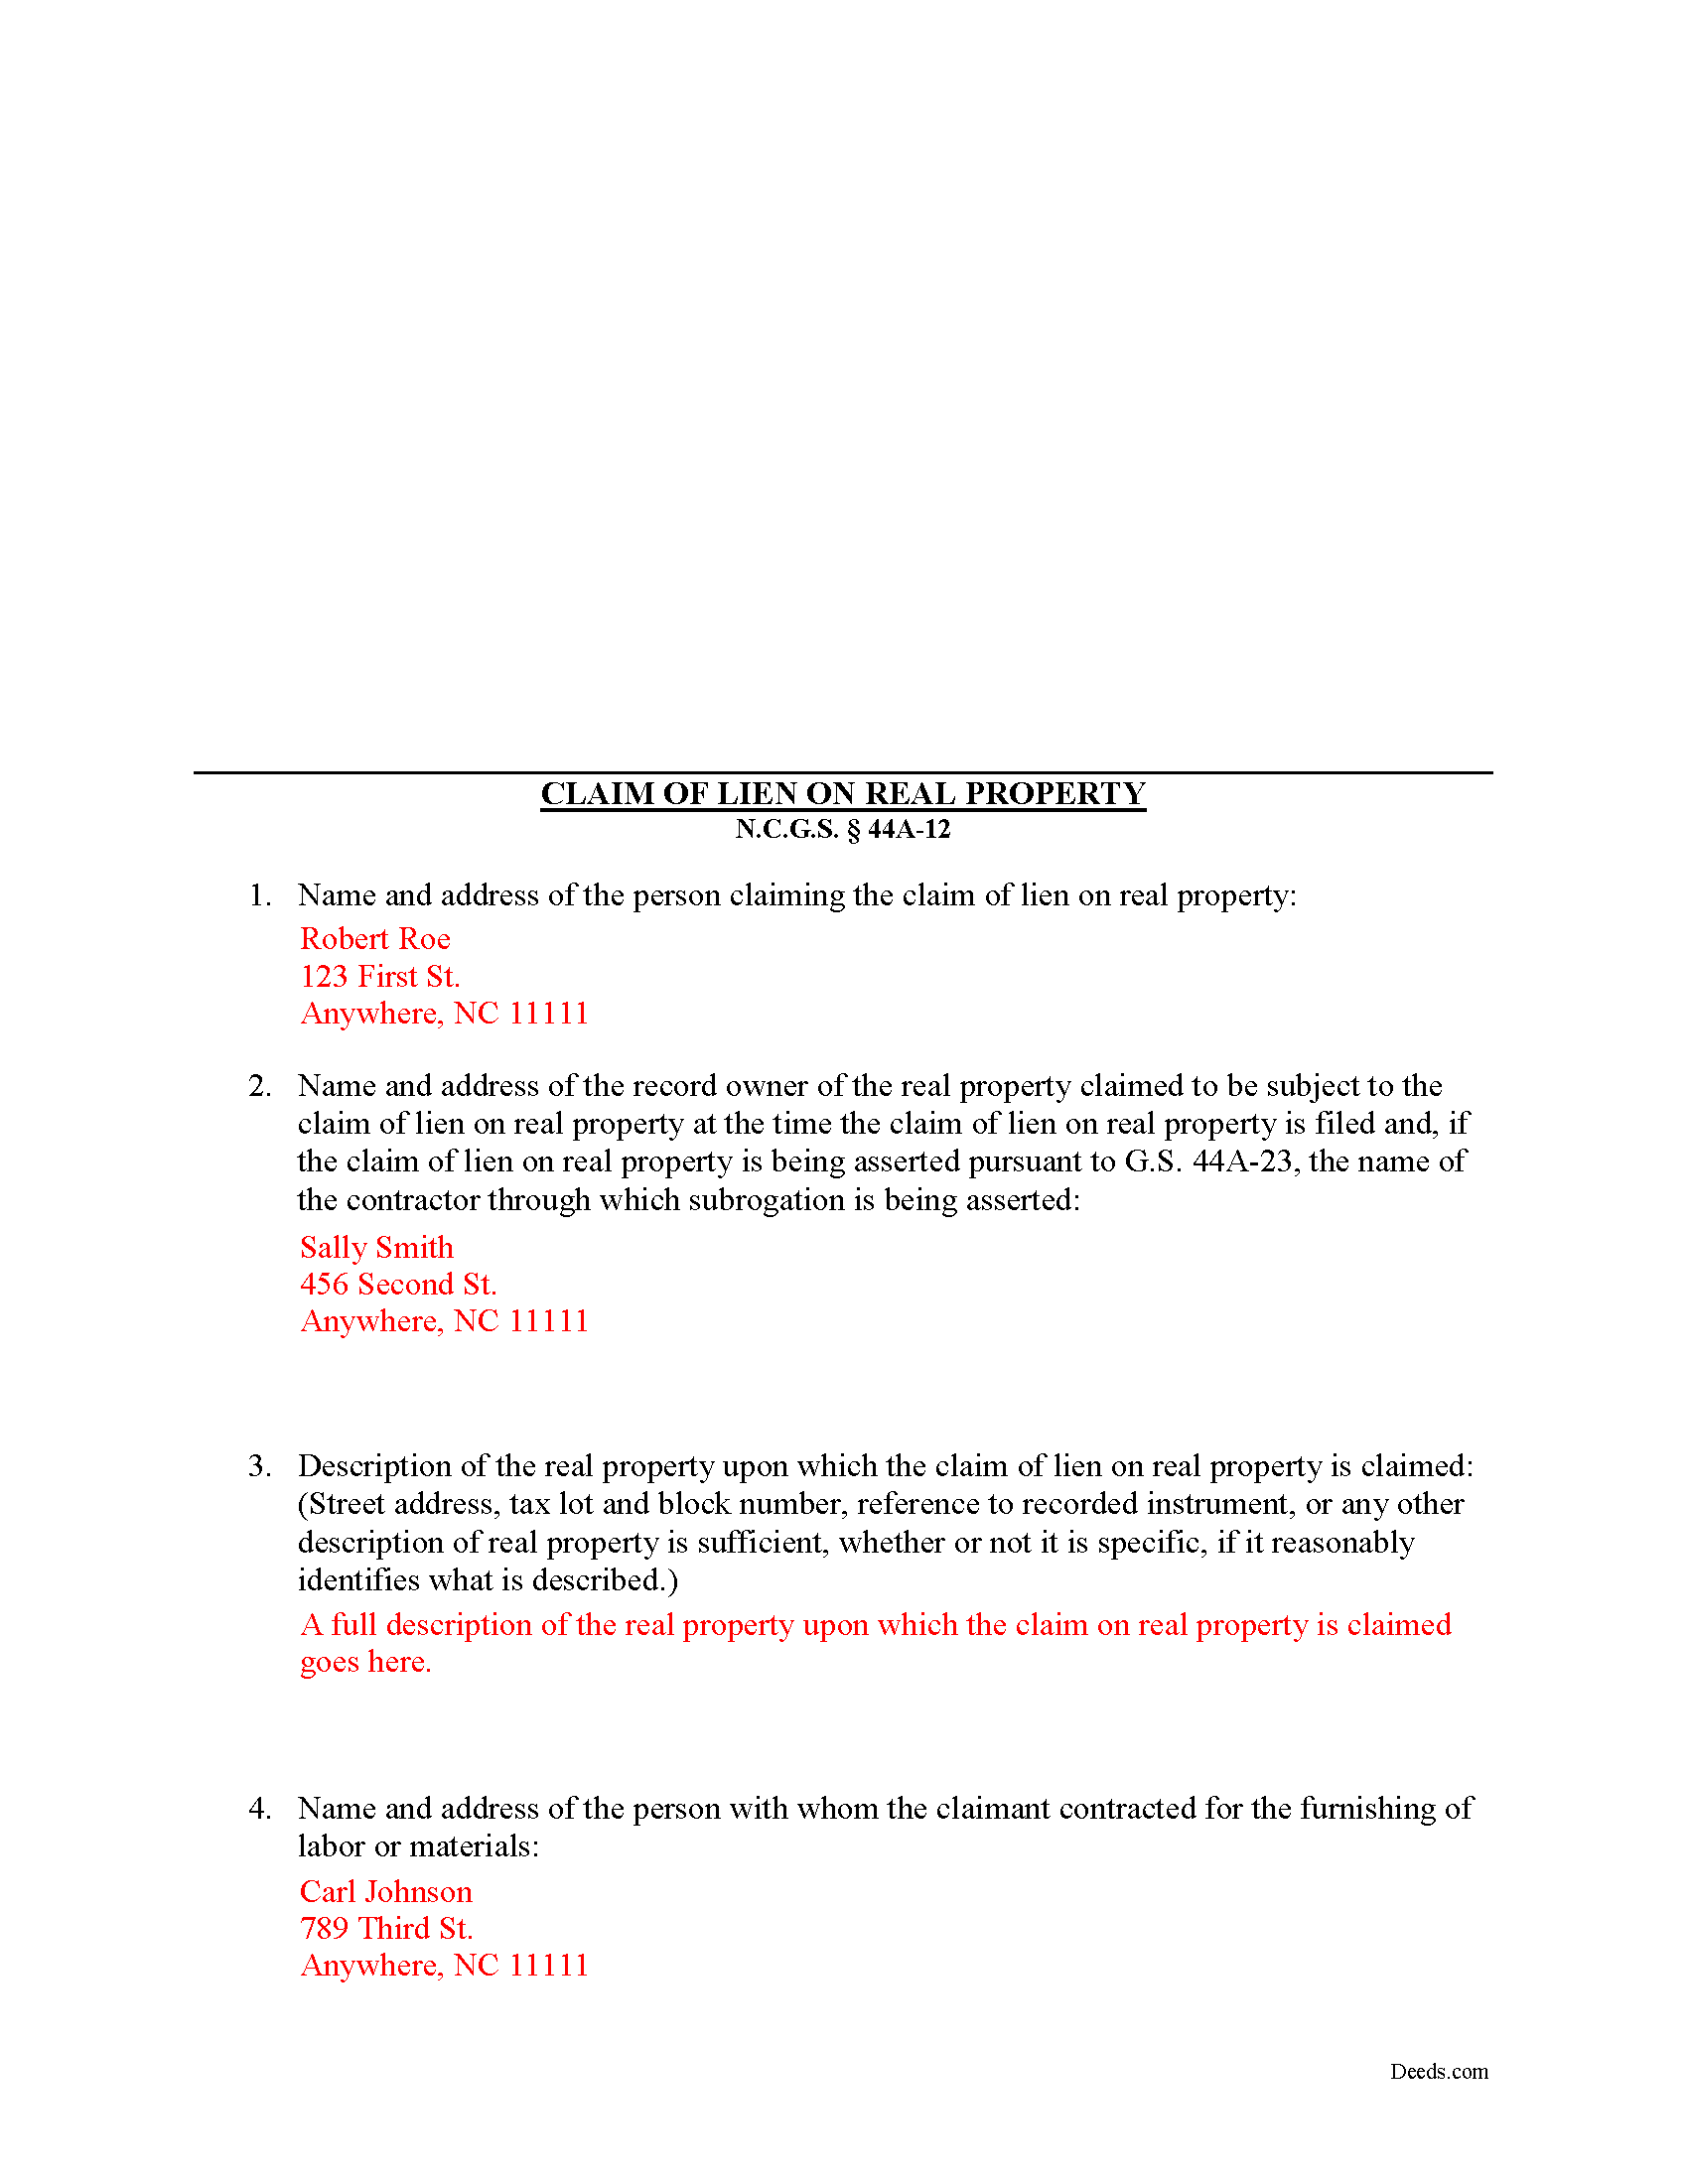 Completed Example of the Claim of Mechanics Lien Document